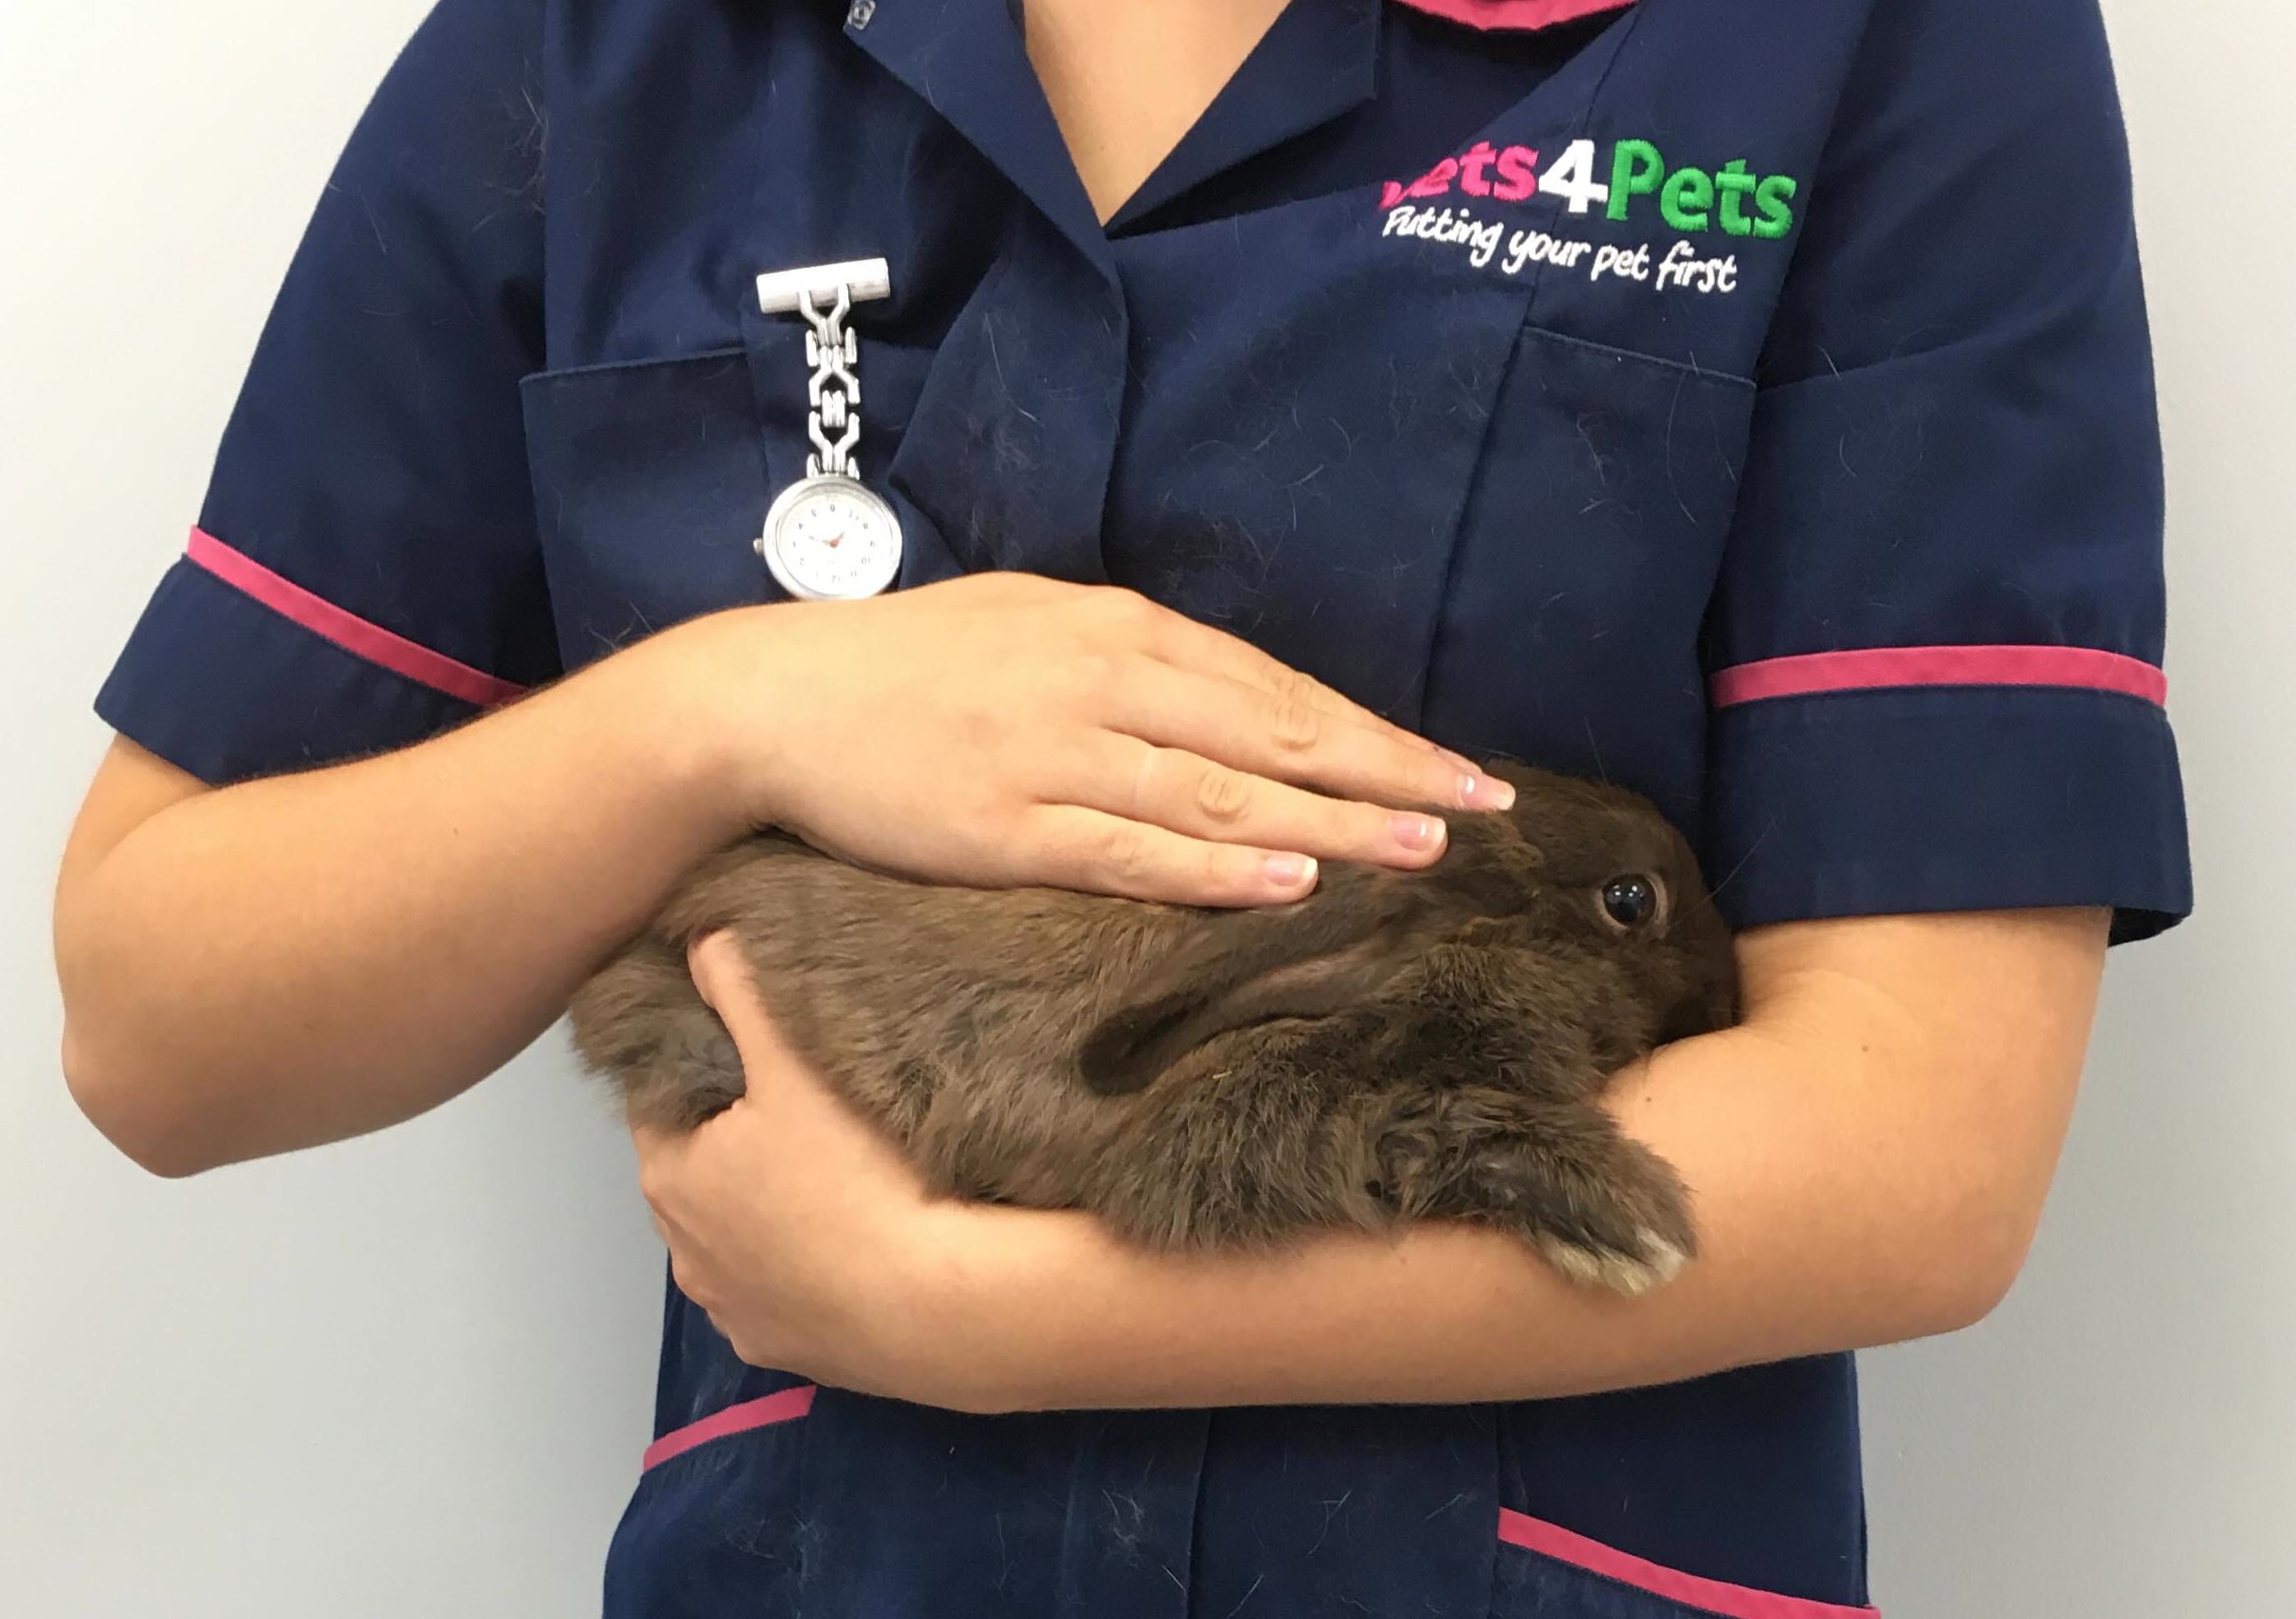 vets that specialize in rabbits